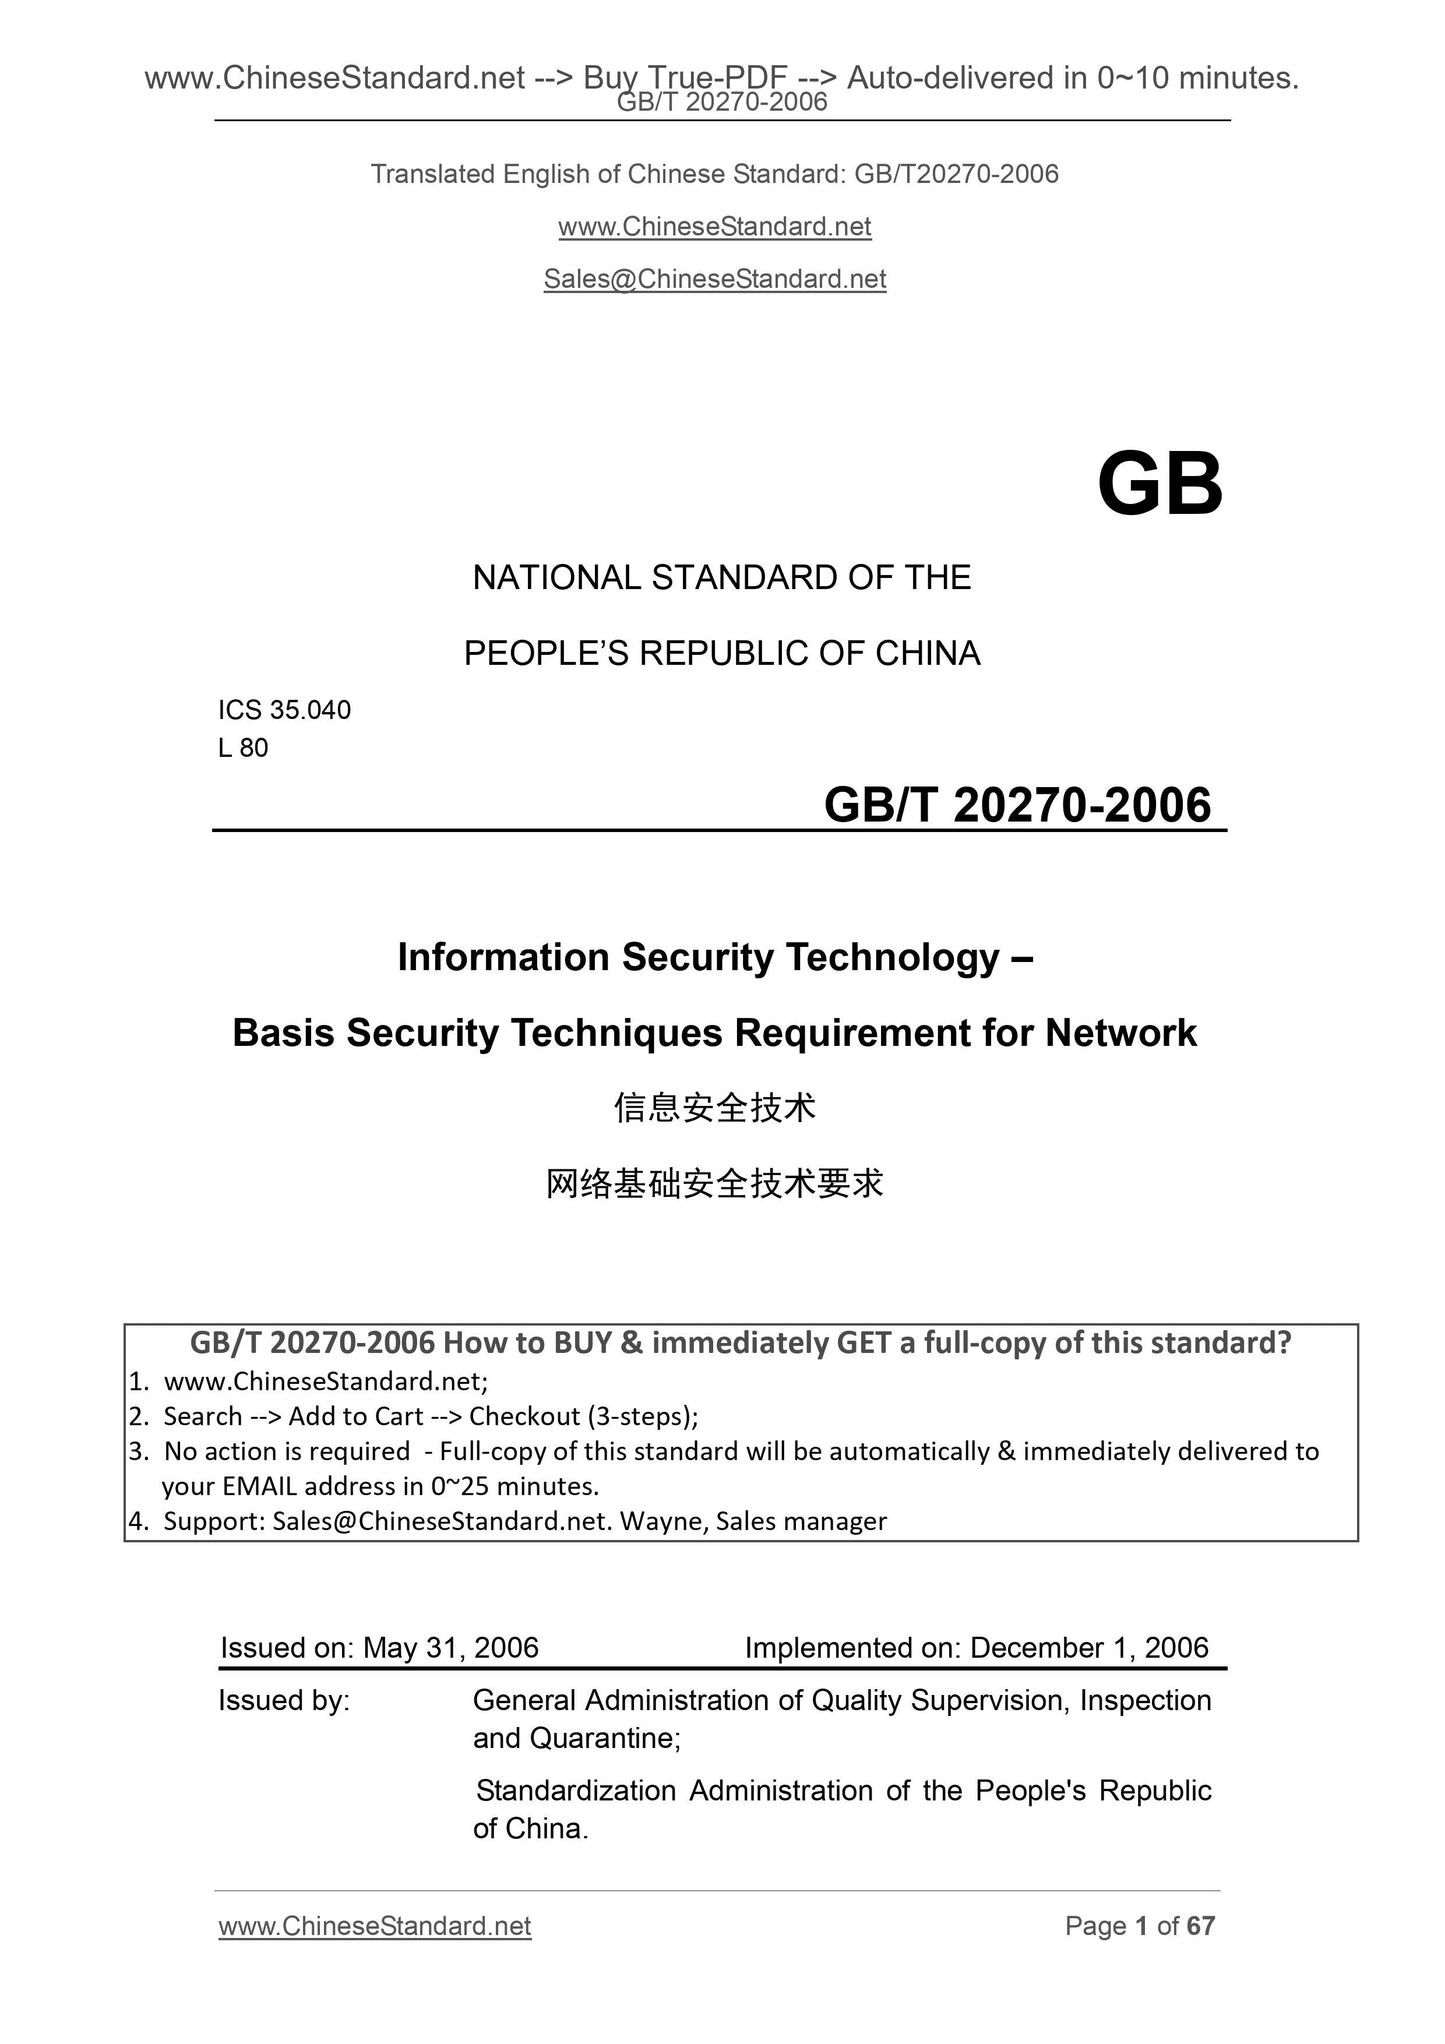 GB/T 20270-2006 Page 1